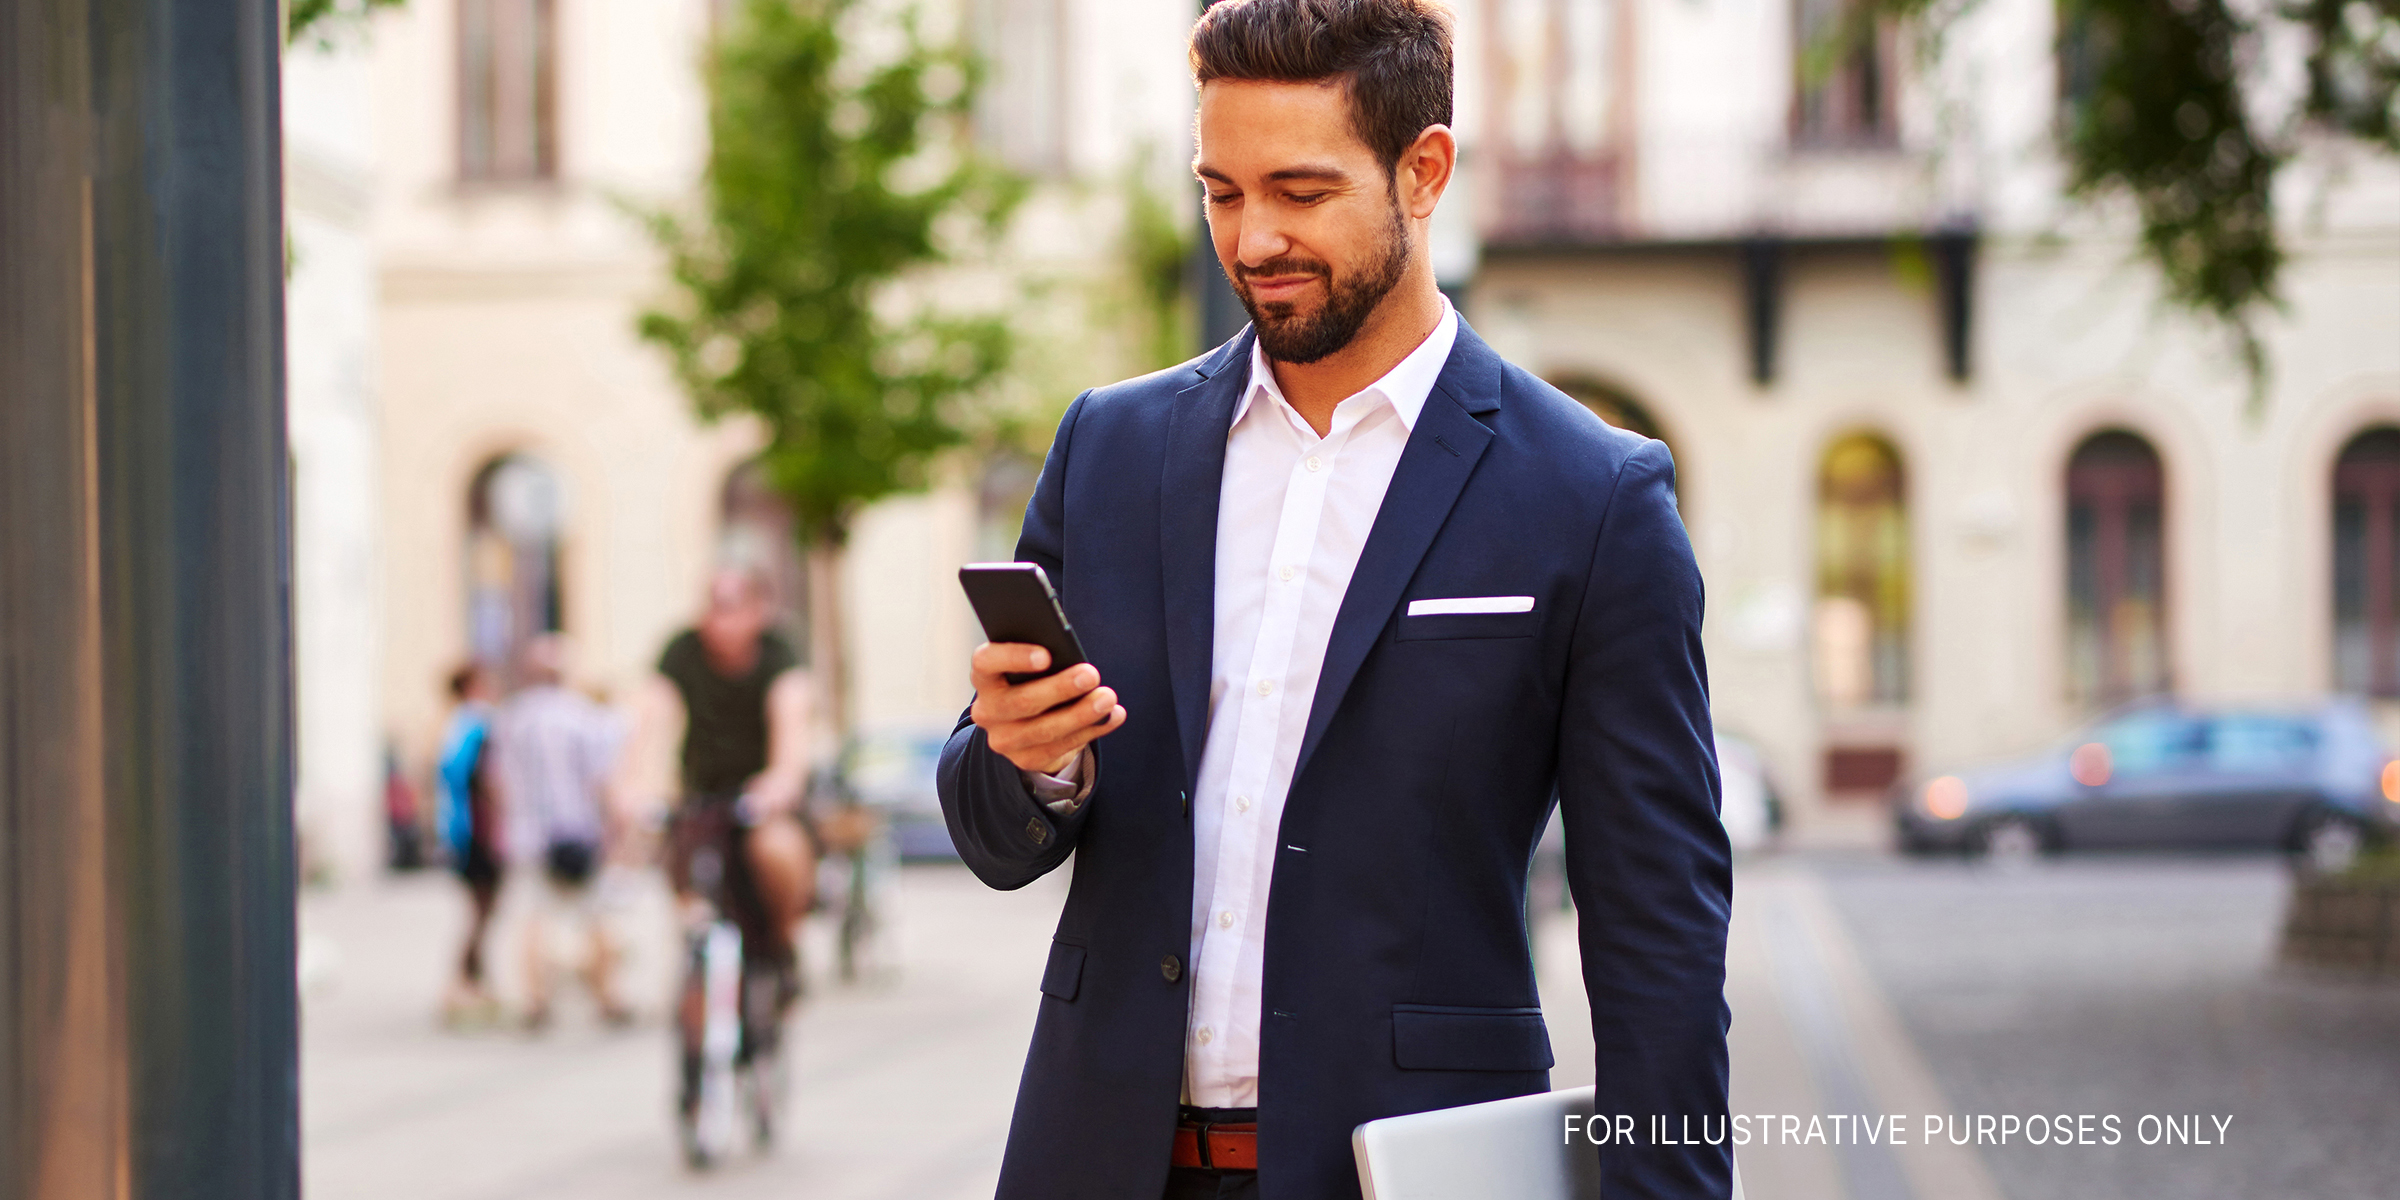 Young, good-looking businessman using the phone. | Source: Shutterstock